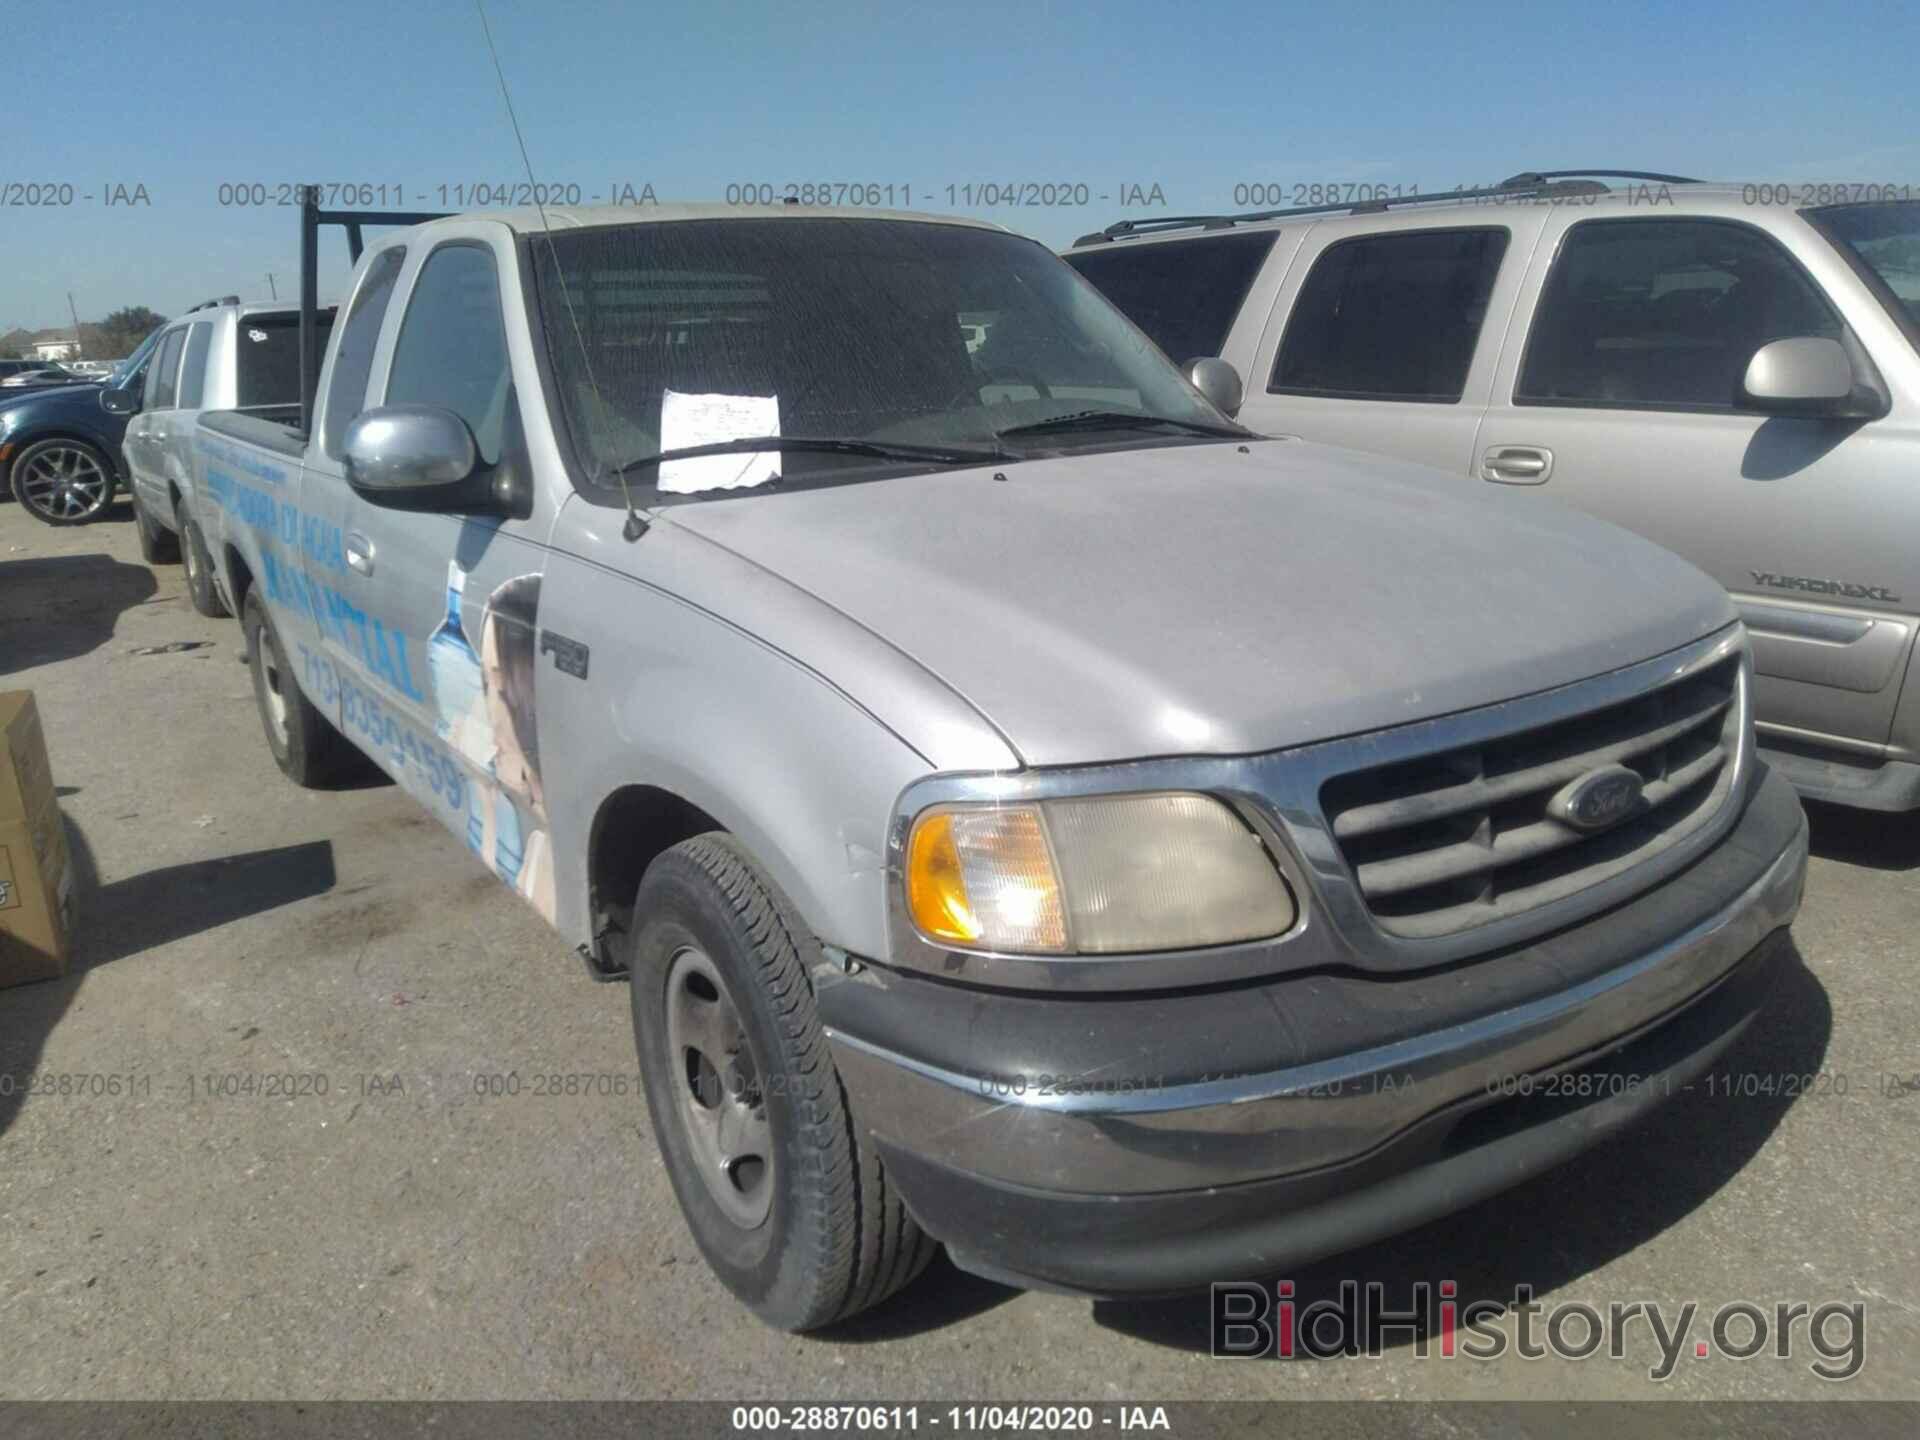 Photo 2FTZX1729YCA76319 - FORD F-150 2000